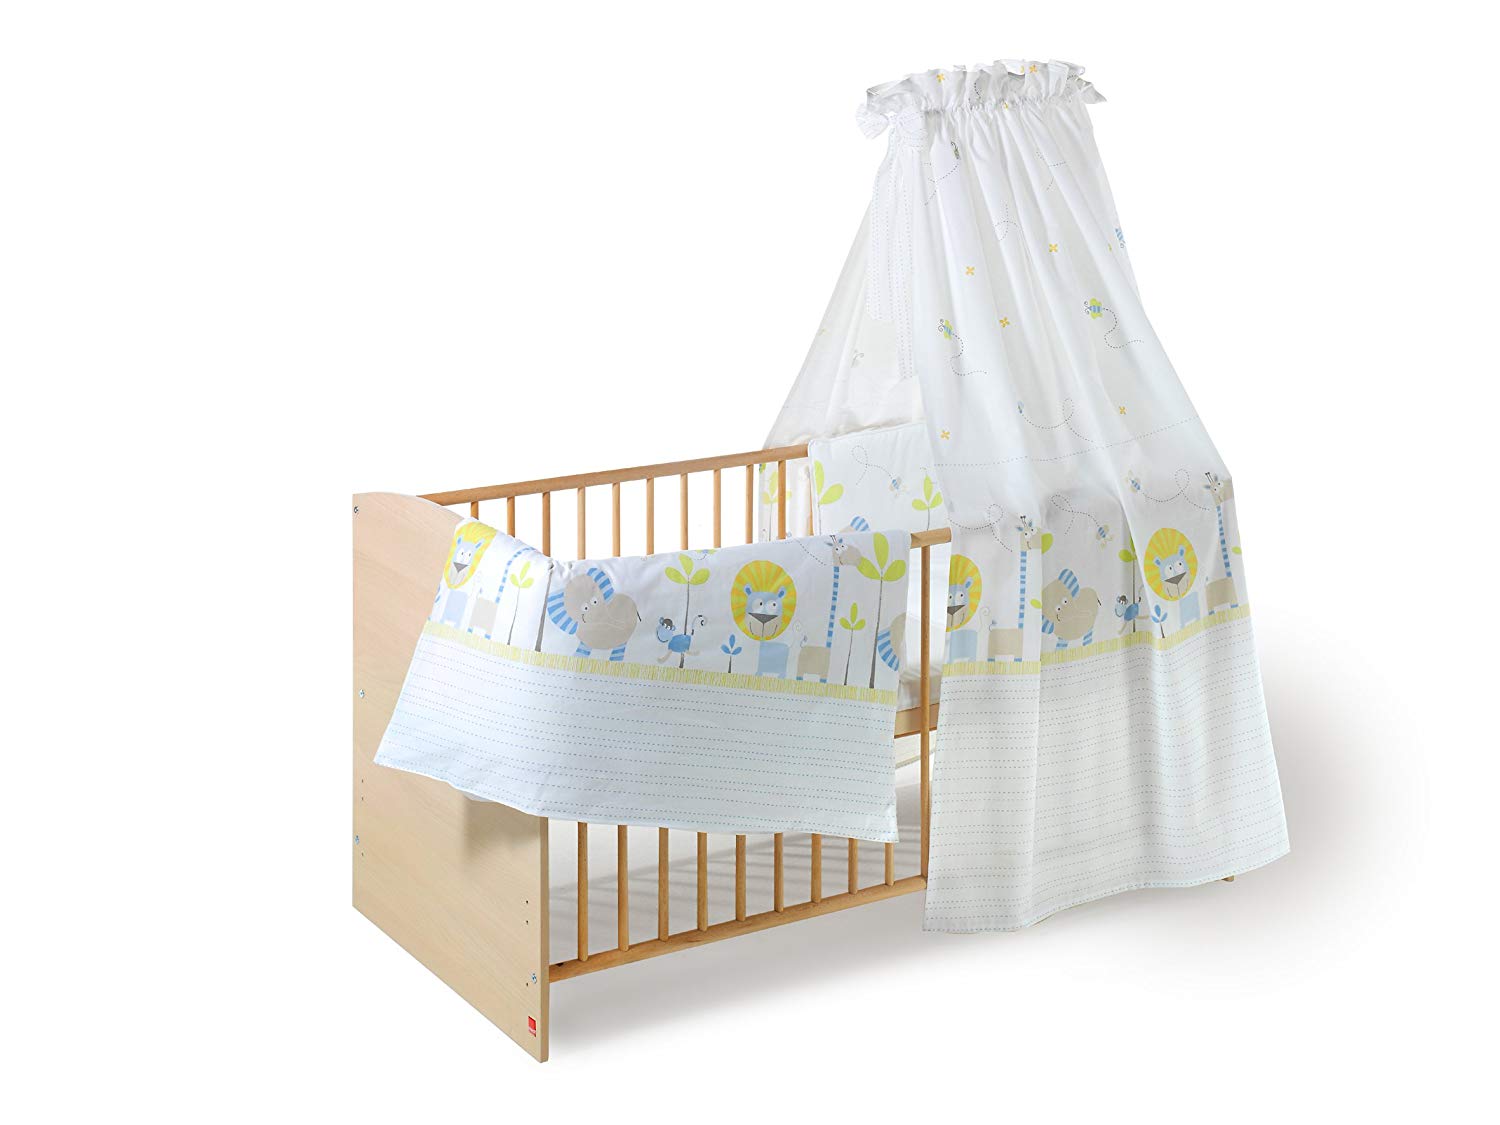 Schardt Classic Complete Bed Cot 4-Piece Set Bed Set, Canopy Pole and Mattr